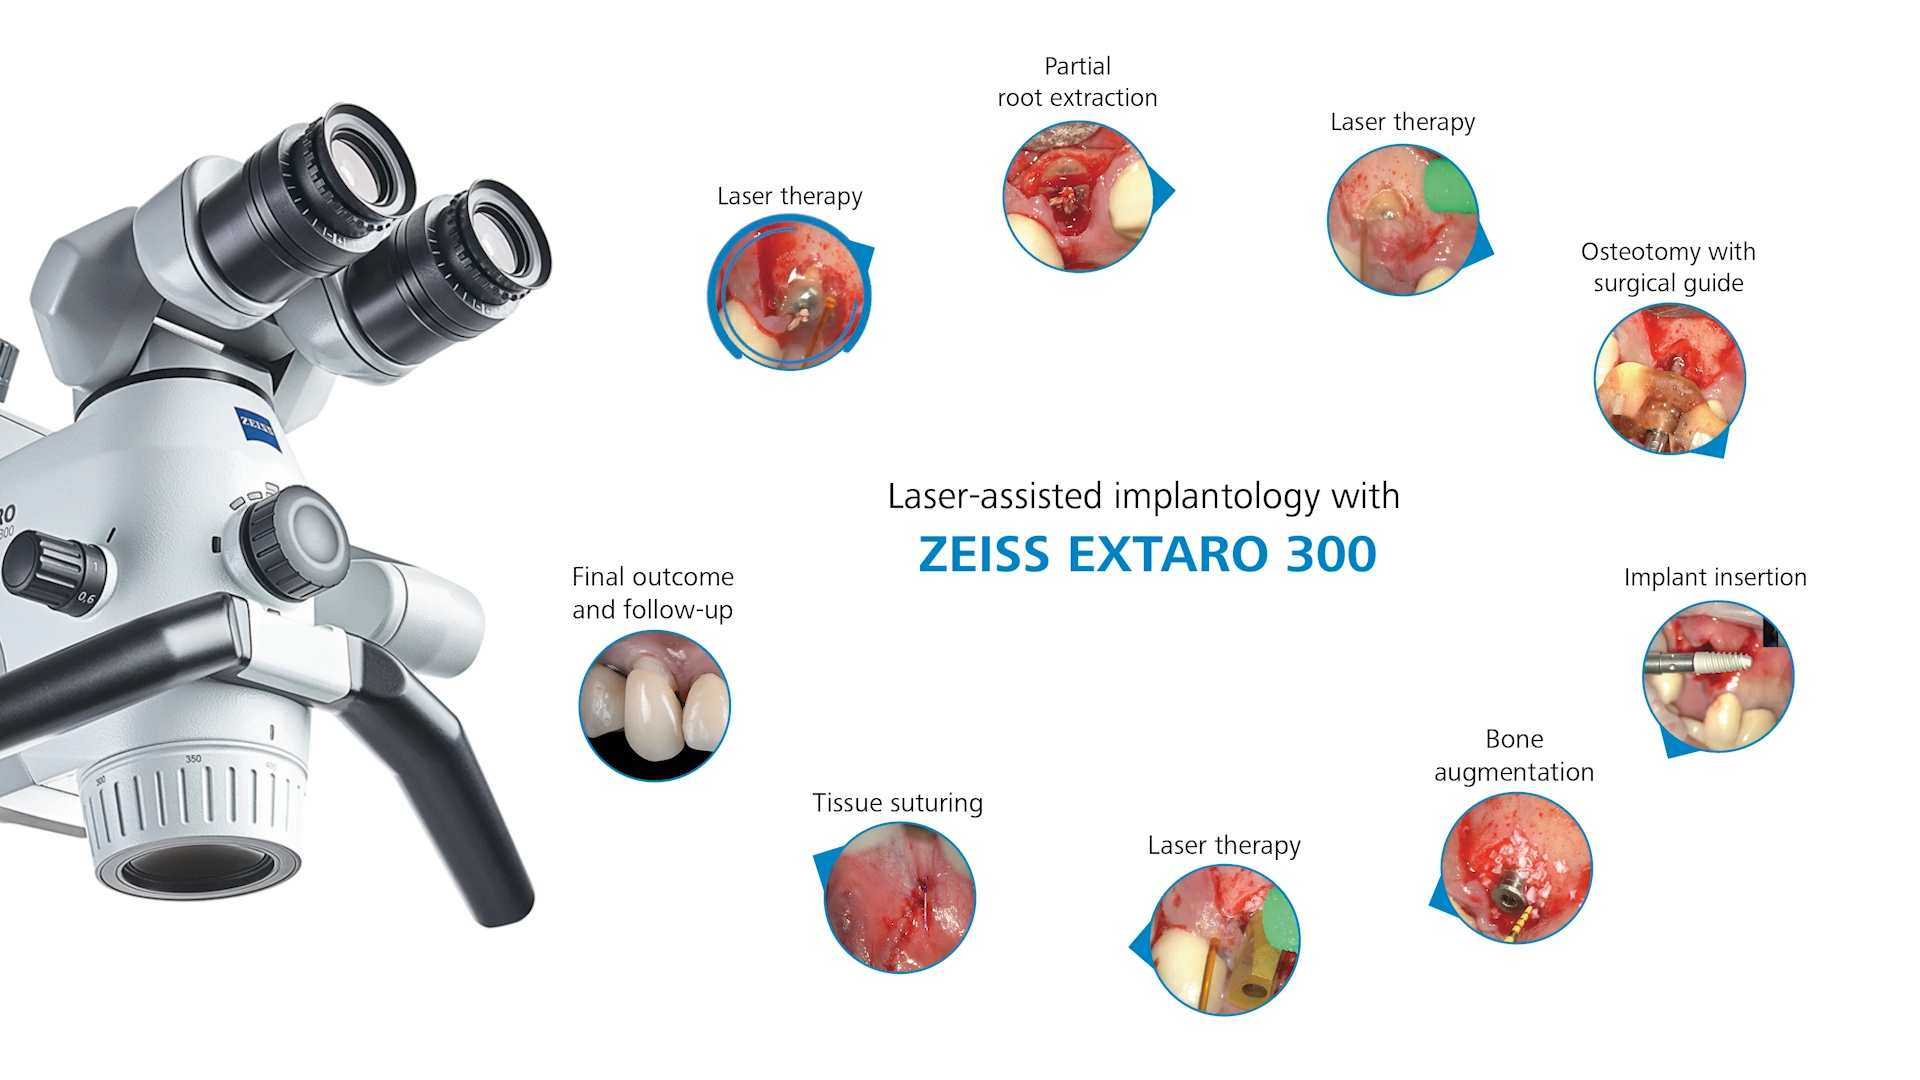 Laser-assisted implantology with ZEISS EXTARO 300